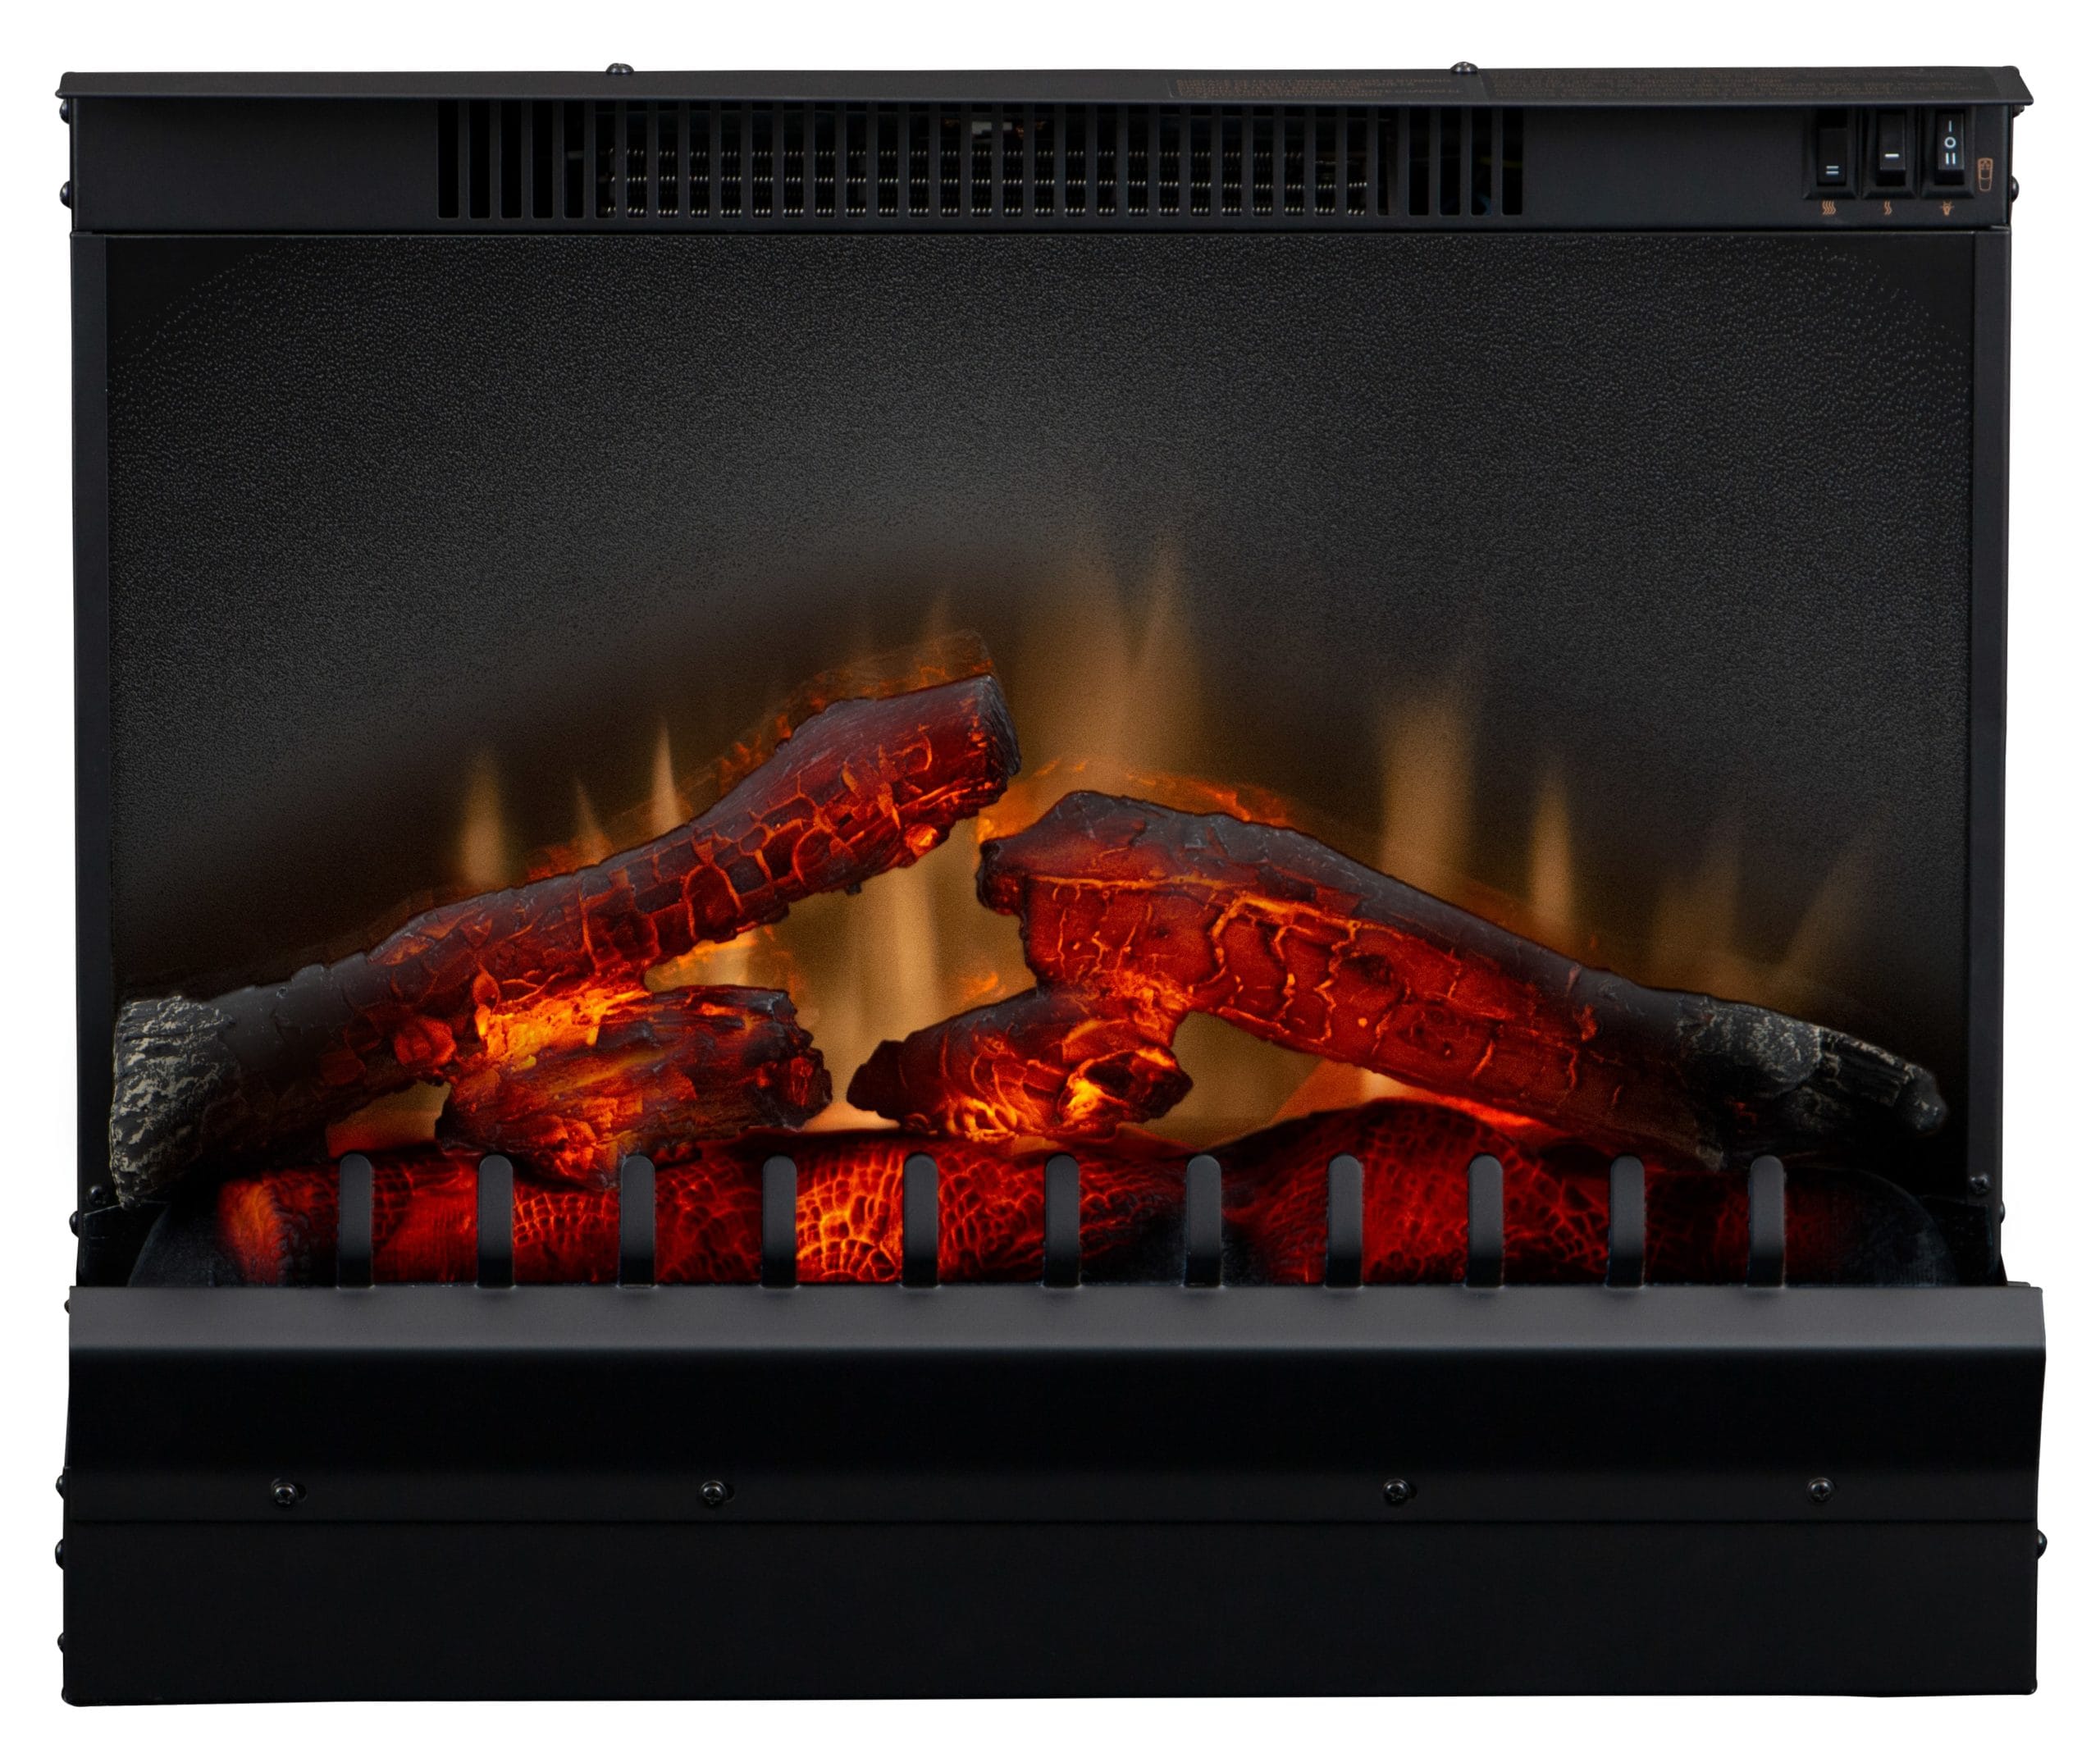 DFI2310 Electric Fireplace Insert by Dimplex